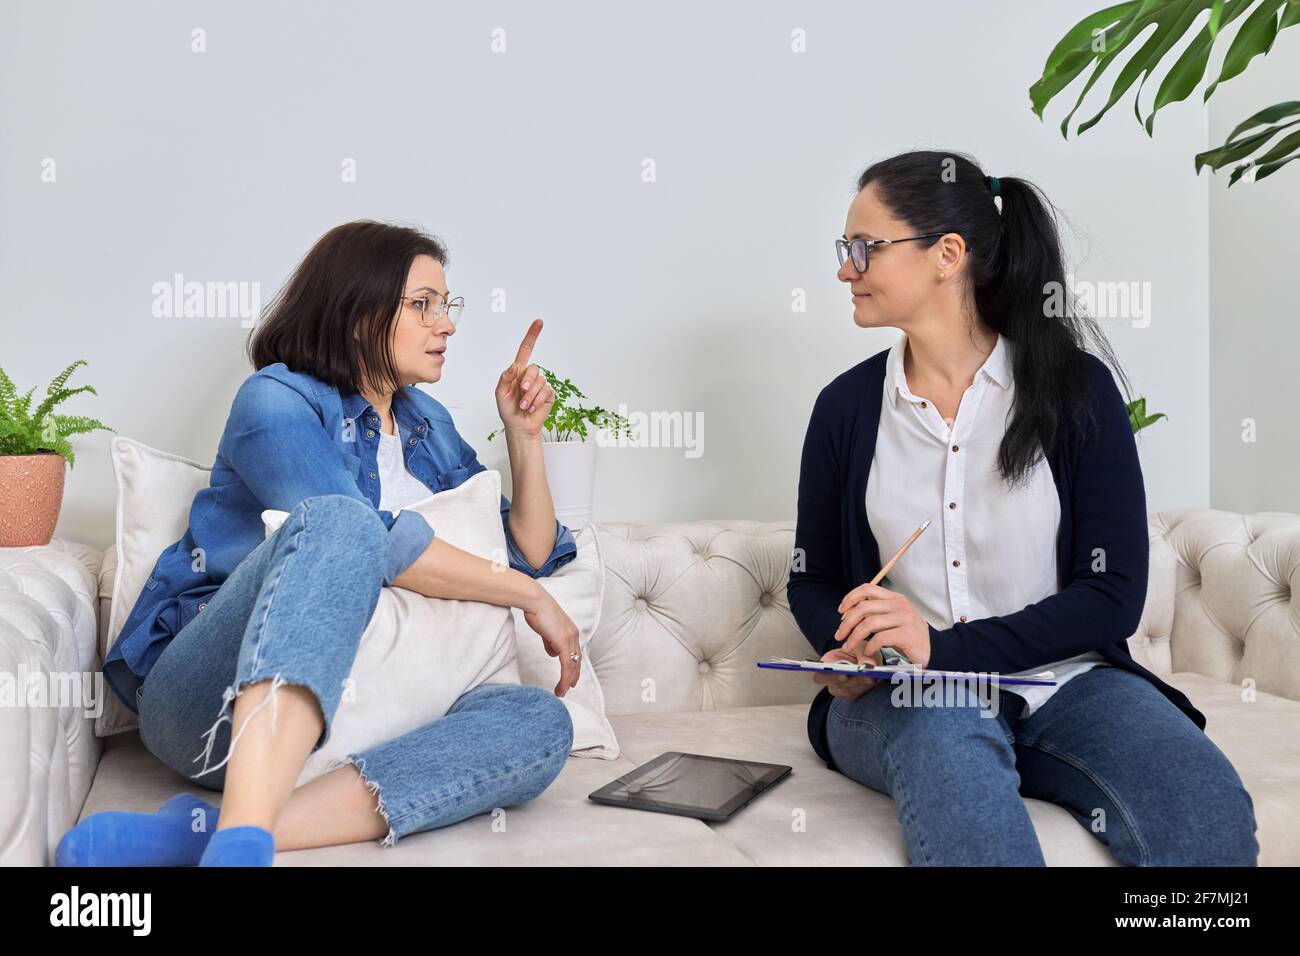 Midlife crisis, mature woman in consultation with psychologist Stock Photo